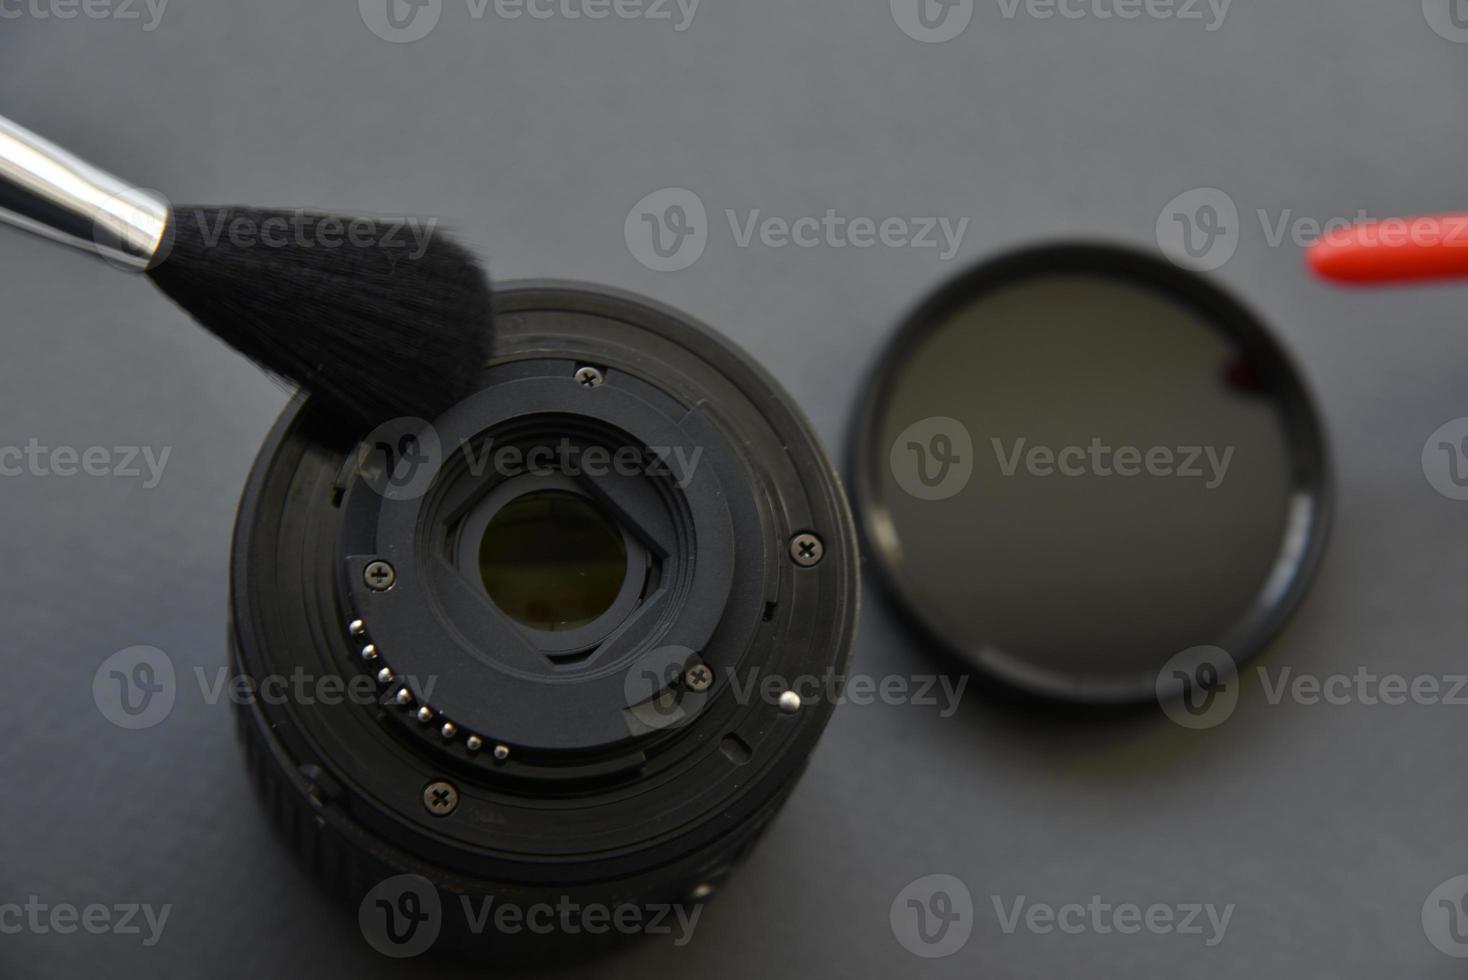 Cleaning photo lenses with a brush and a pear